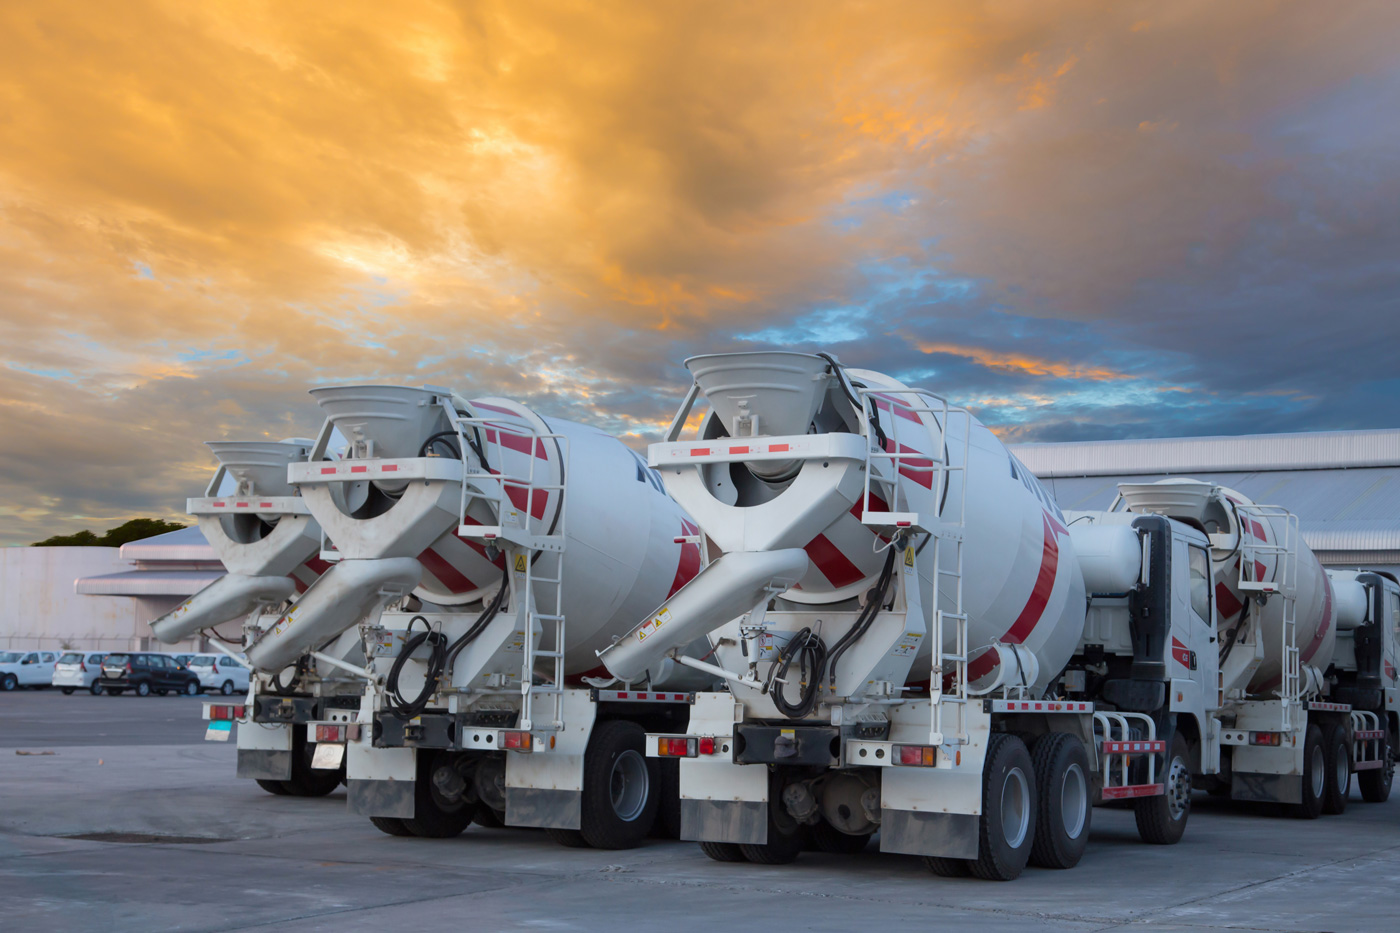 multiple cement mixer trucks parked in a lot